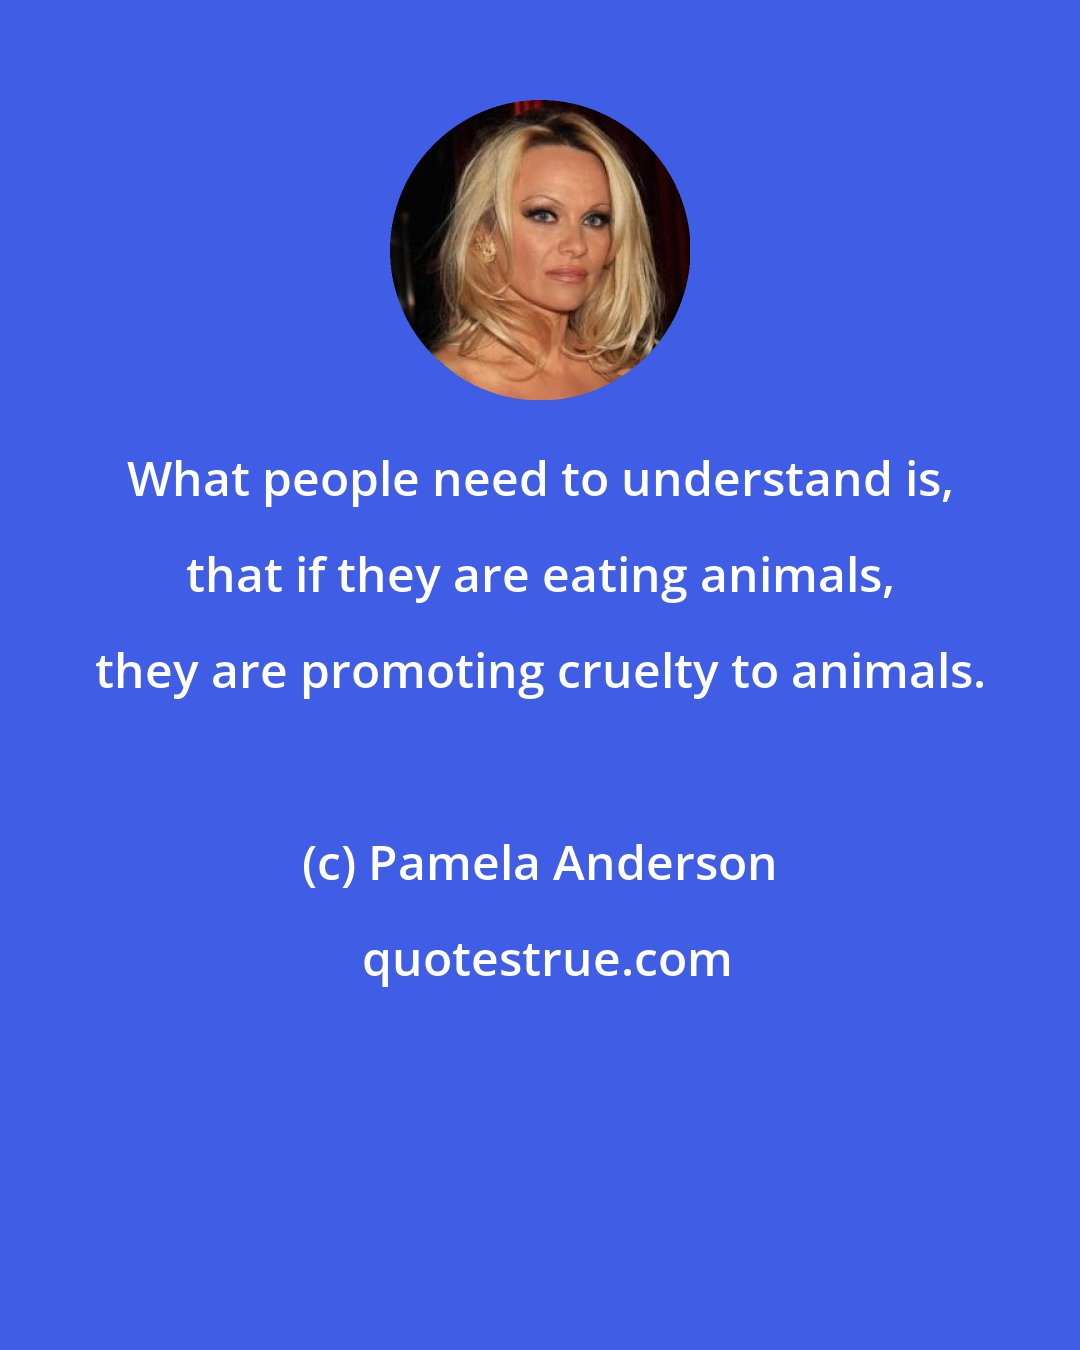 Pamela Anderson: What people need to understand is, that if they are eating animals, they are promoting cruelty to animals.